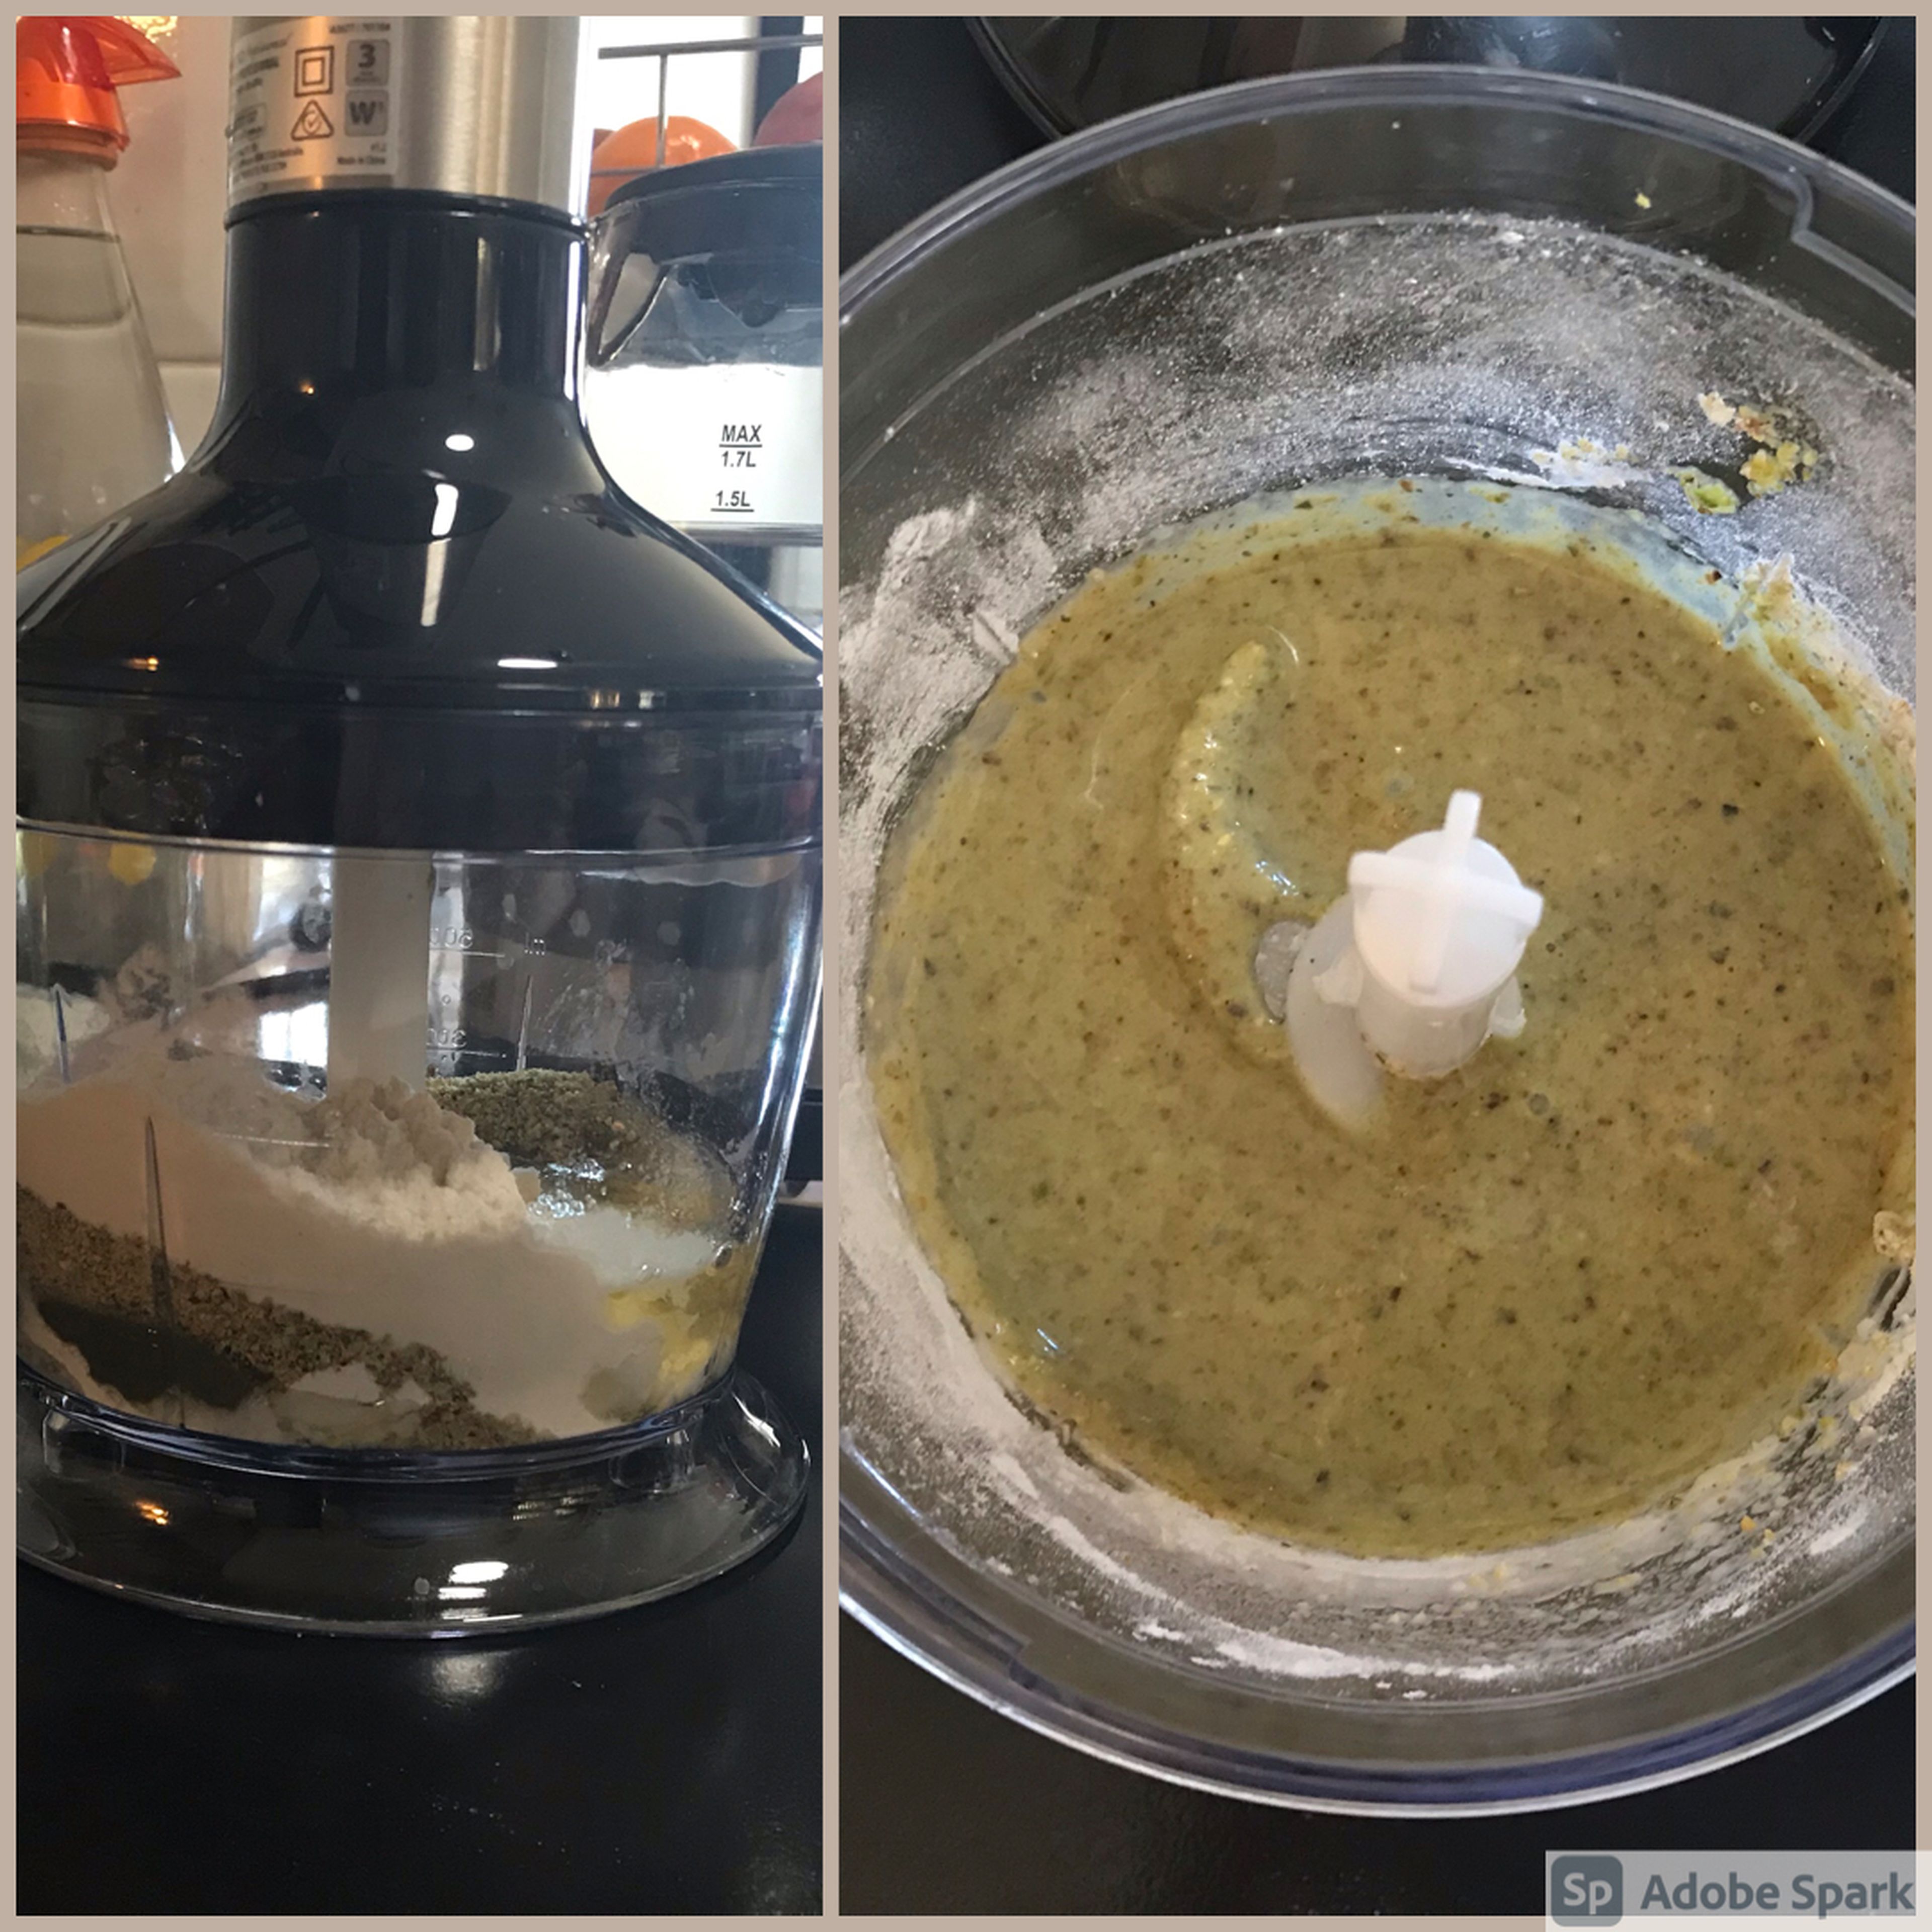 Place remaining ingredients into a food processor and pulse until combined. Add the brown butter and pulse until just combined.